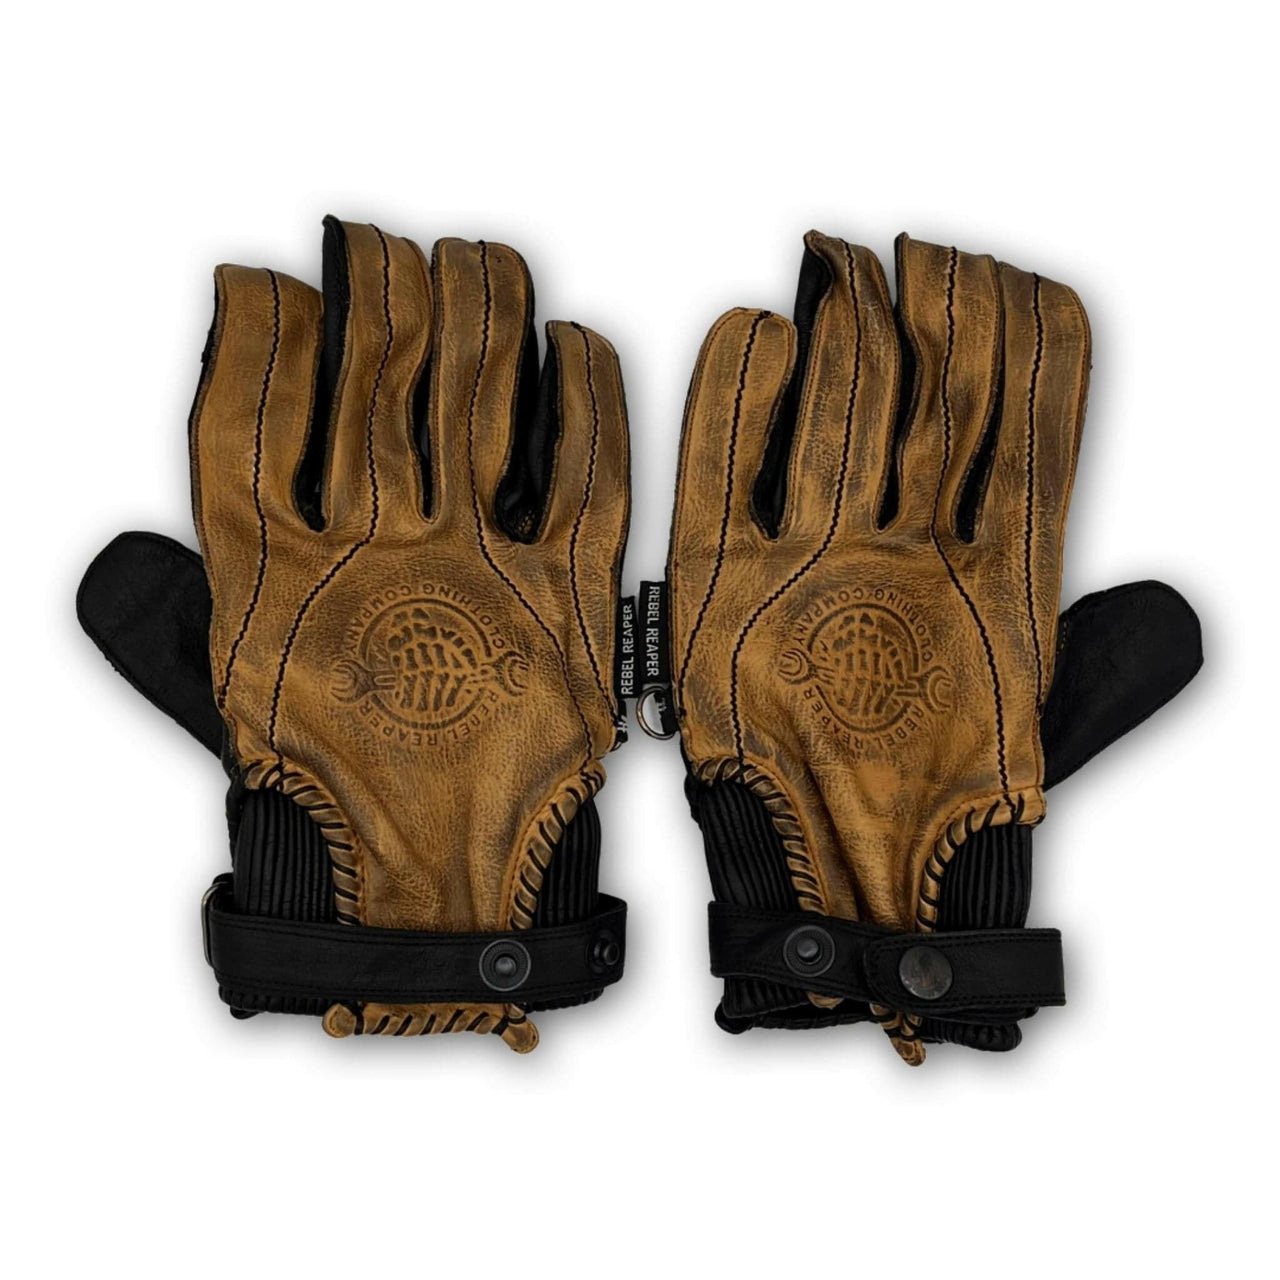 Leather Motorcycle Riding Gloves - Modern Roper - Distressed Brown - Rebel Reaper Clothing CompanyLeather Gloves